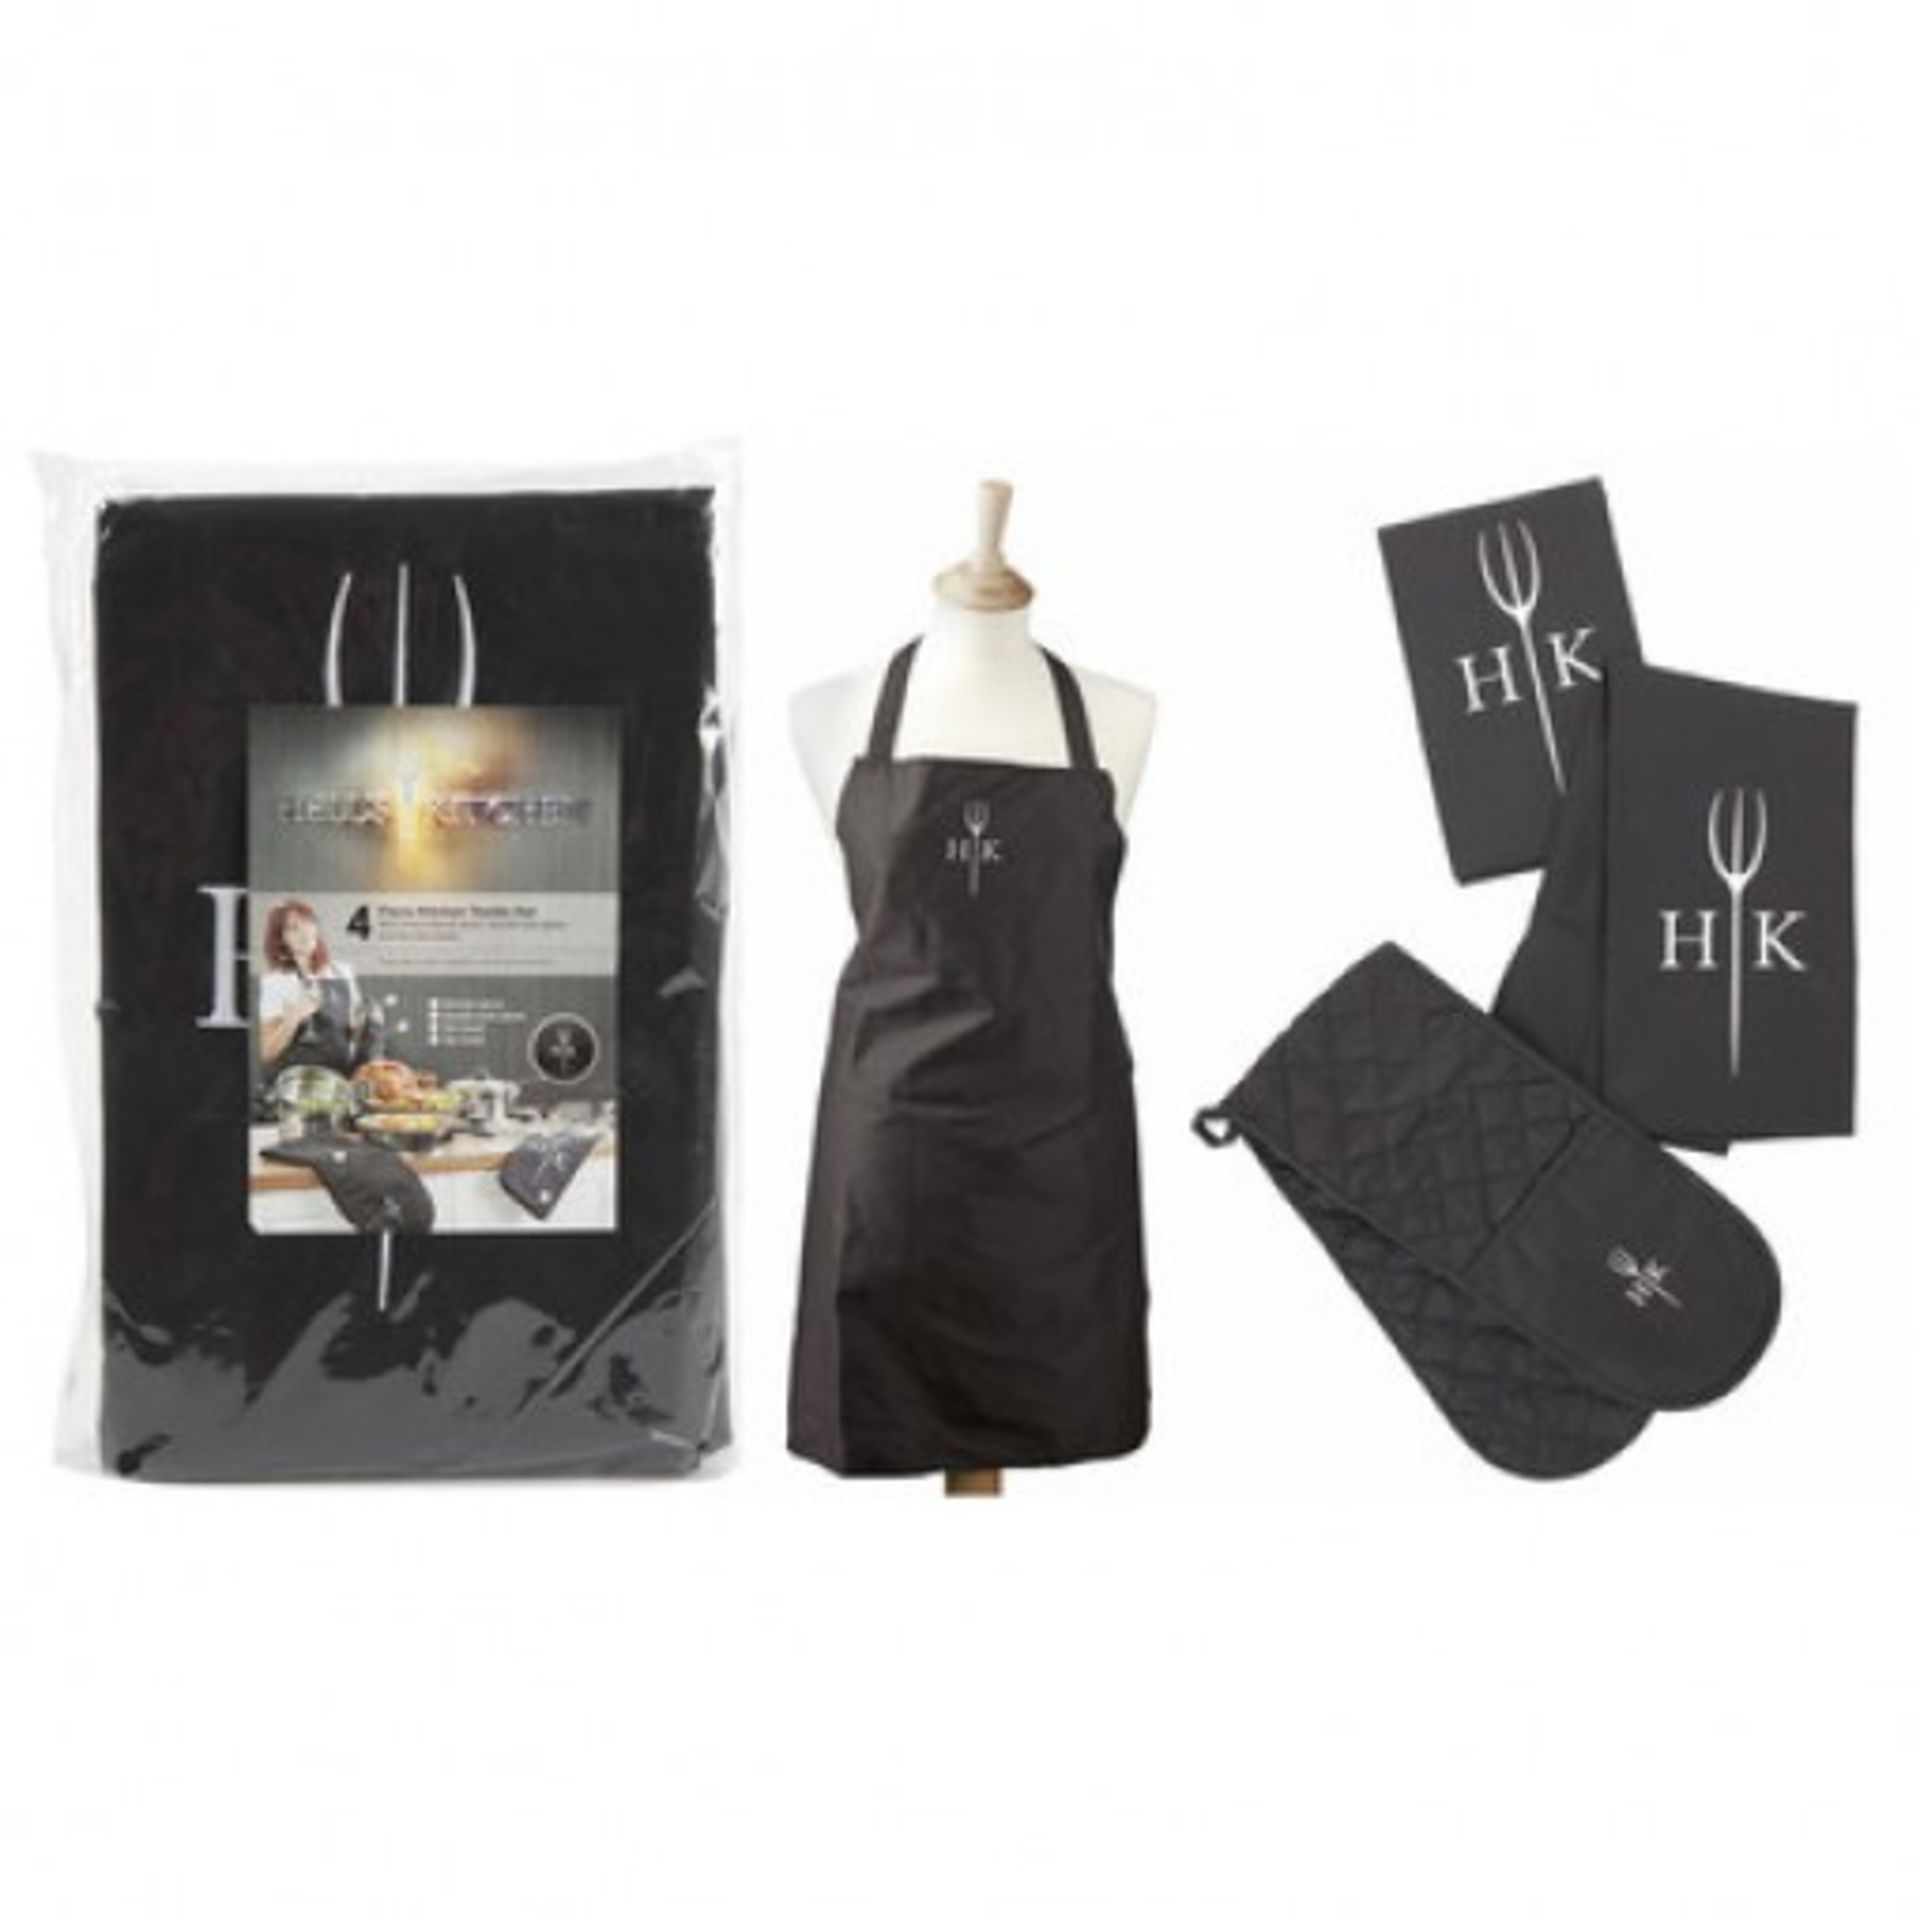 V *TRADE QTY* Brand New Hells Kitchen 4 Piece Kitchen Textile Set inc Double Oven Glove, Two Tea